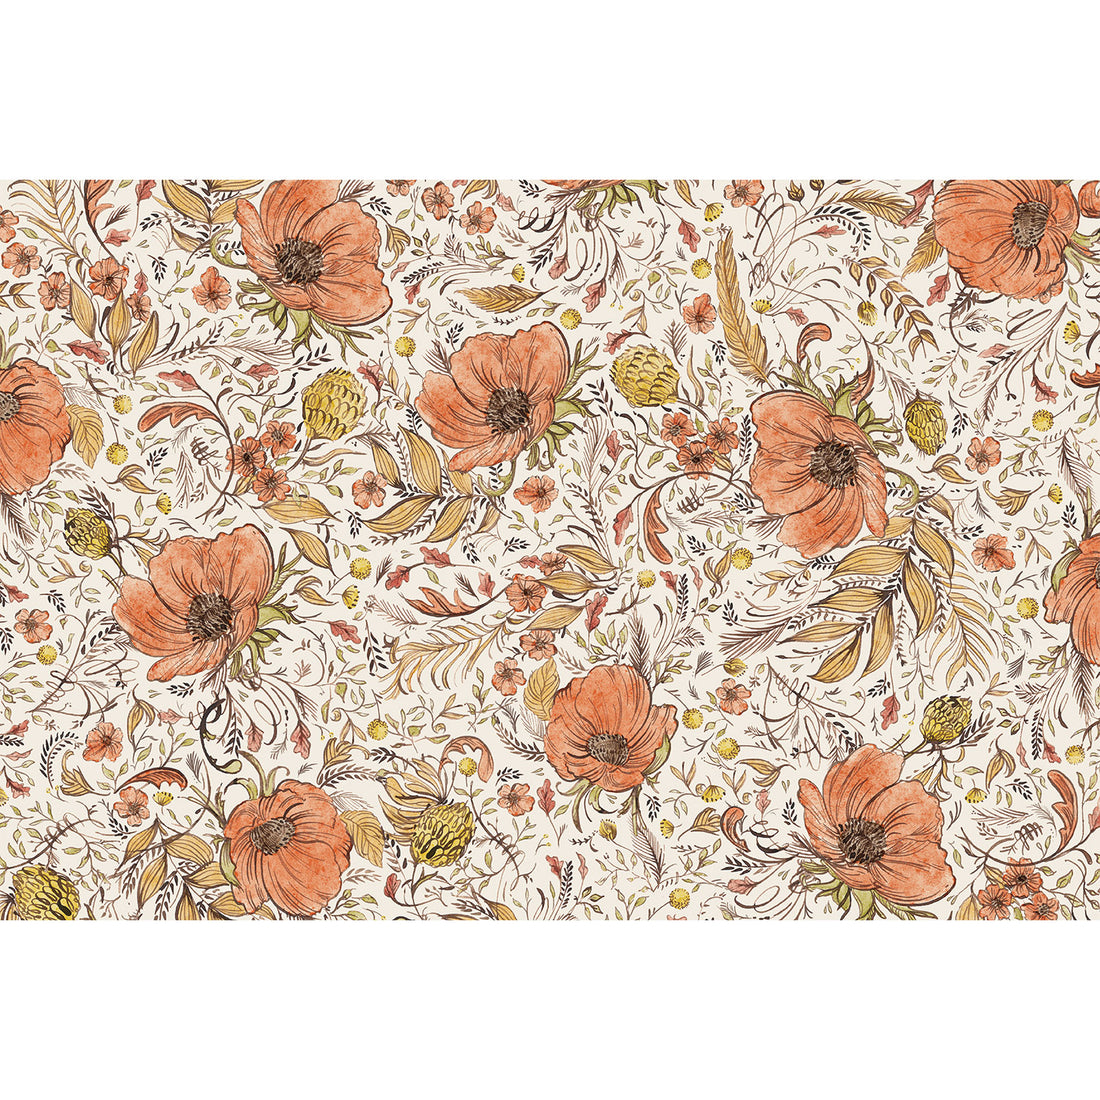 Edge-to-edge botanical design featuring large and small orange flowers, small orange and yellow leaves and seed pods, with painterly flourishes on a white background.